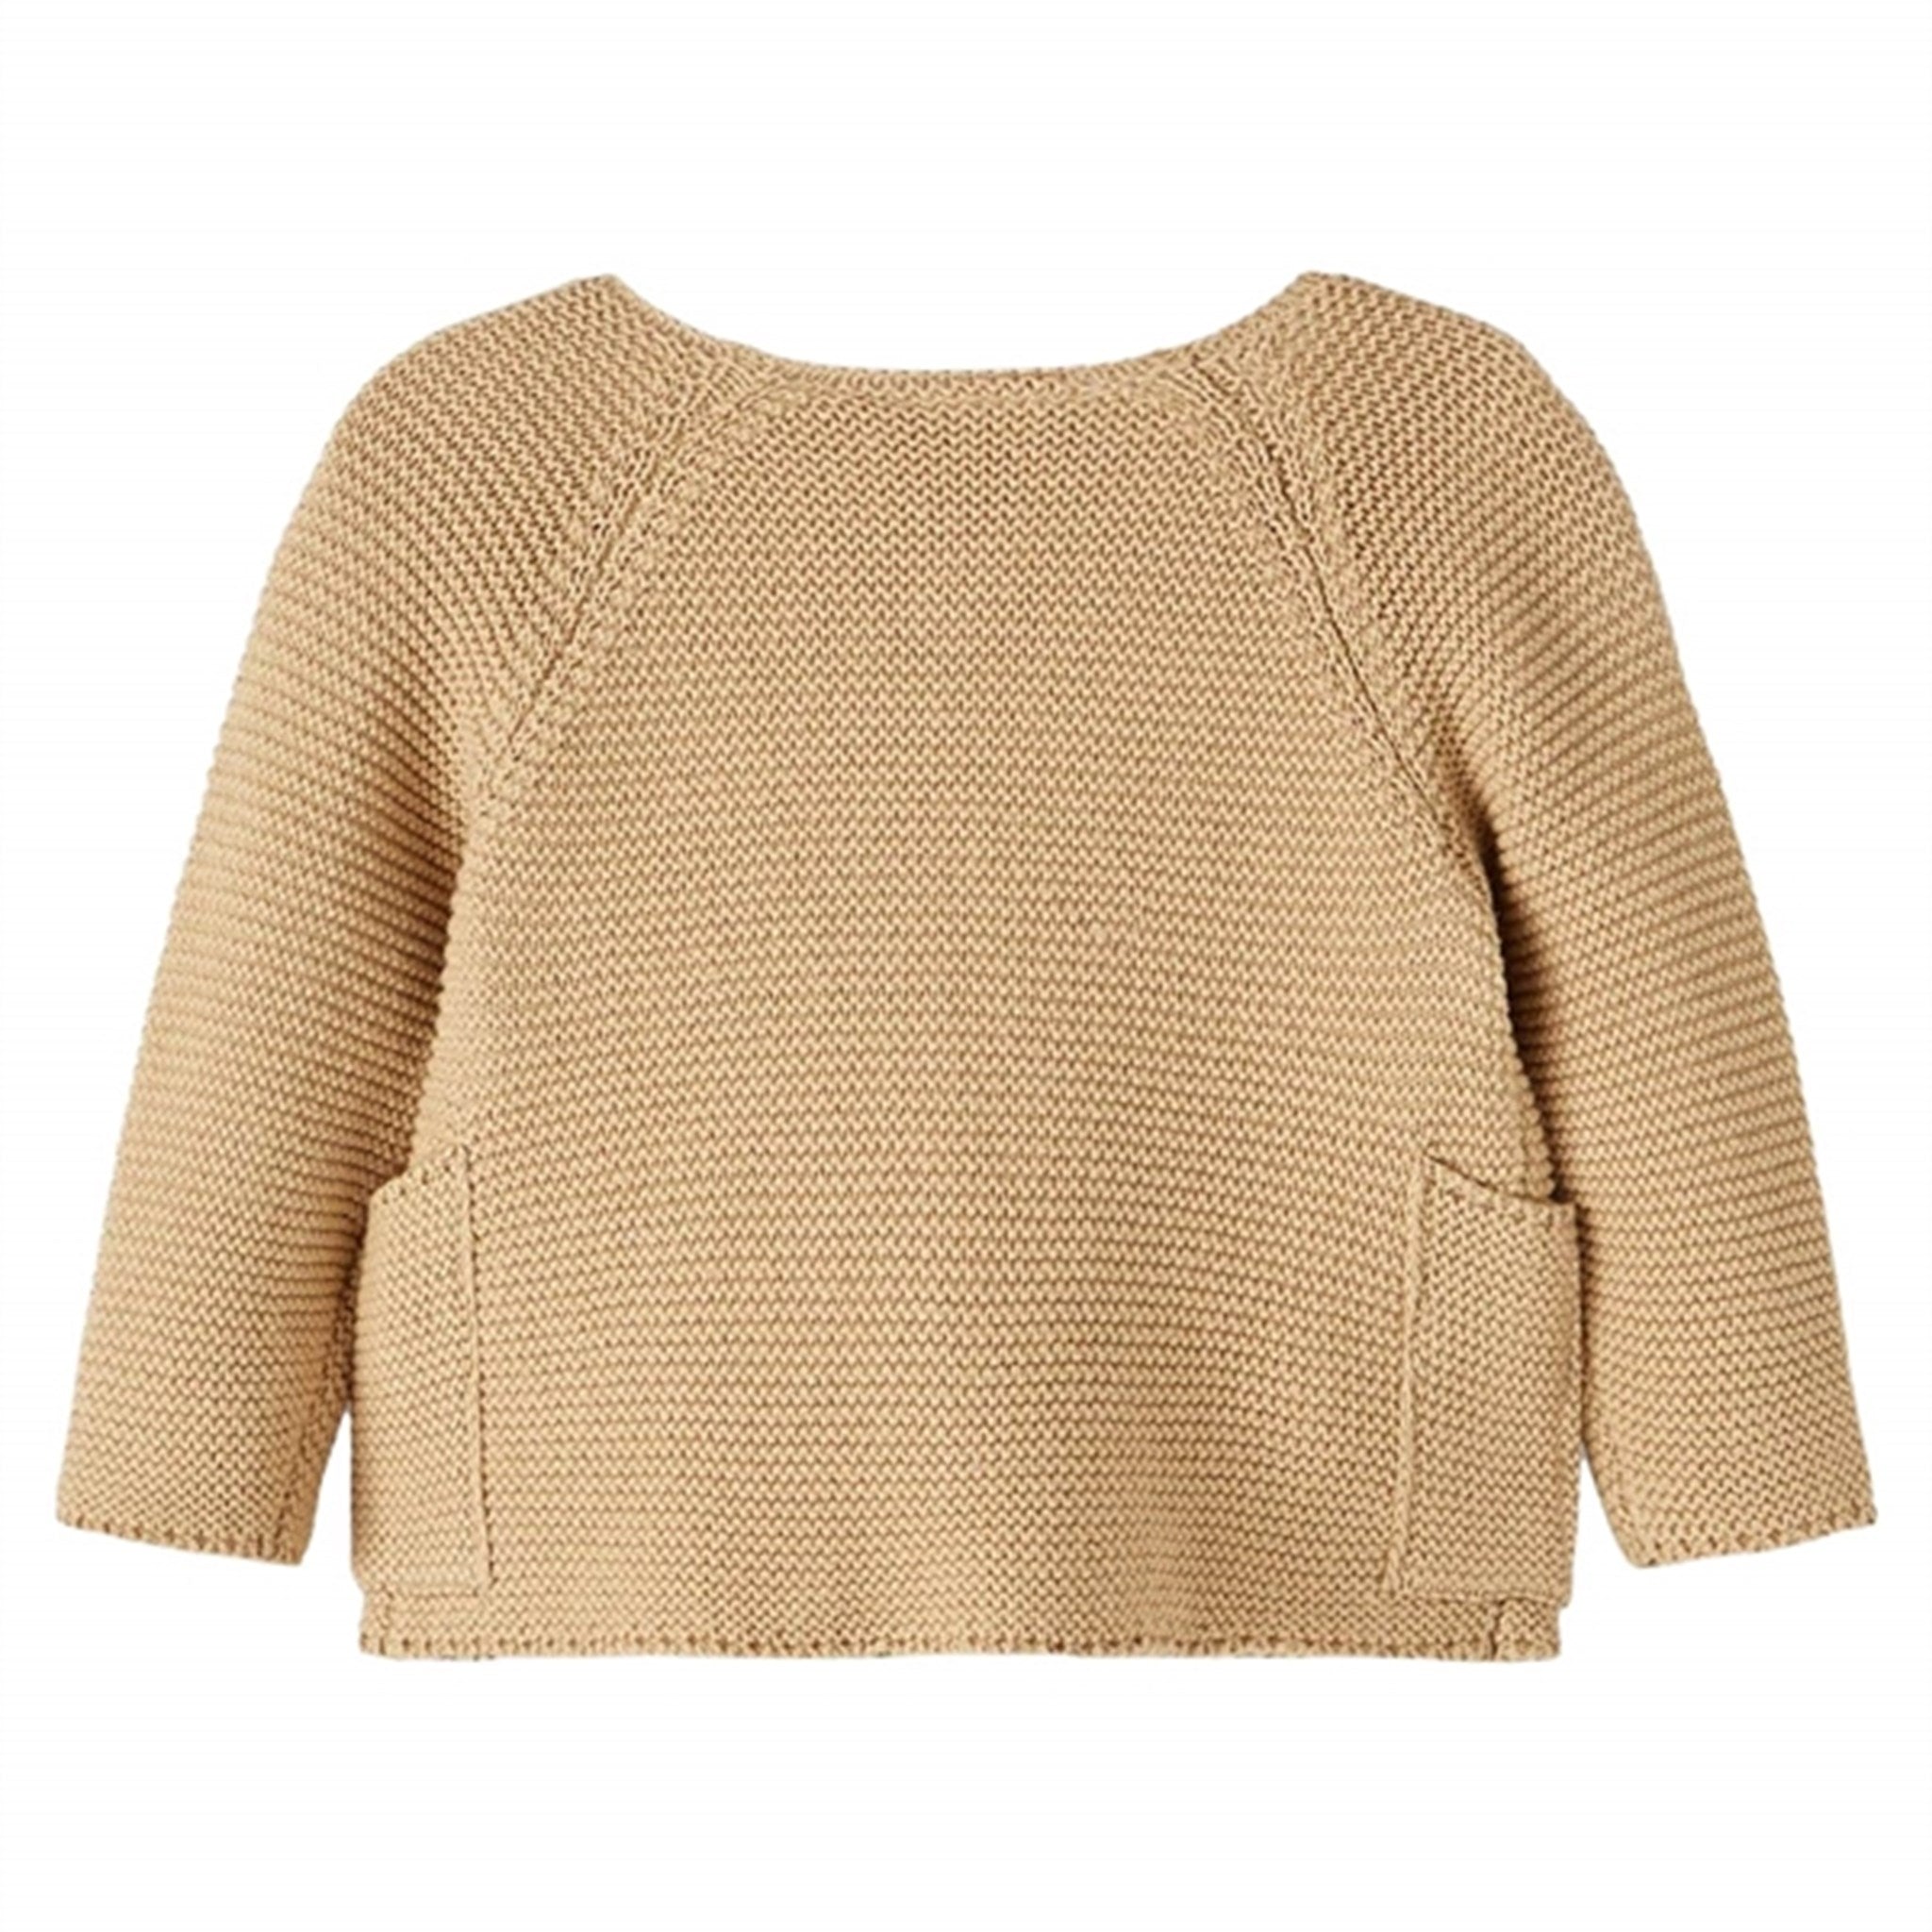 Lil' Atelier Curds & Whey Laguno Loose Knit Cardigan 3